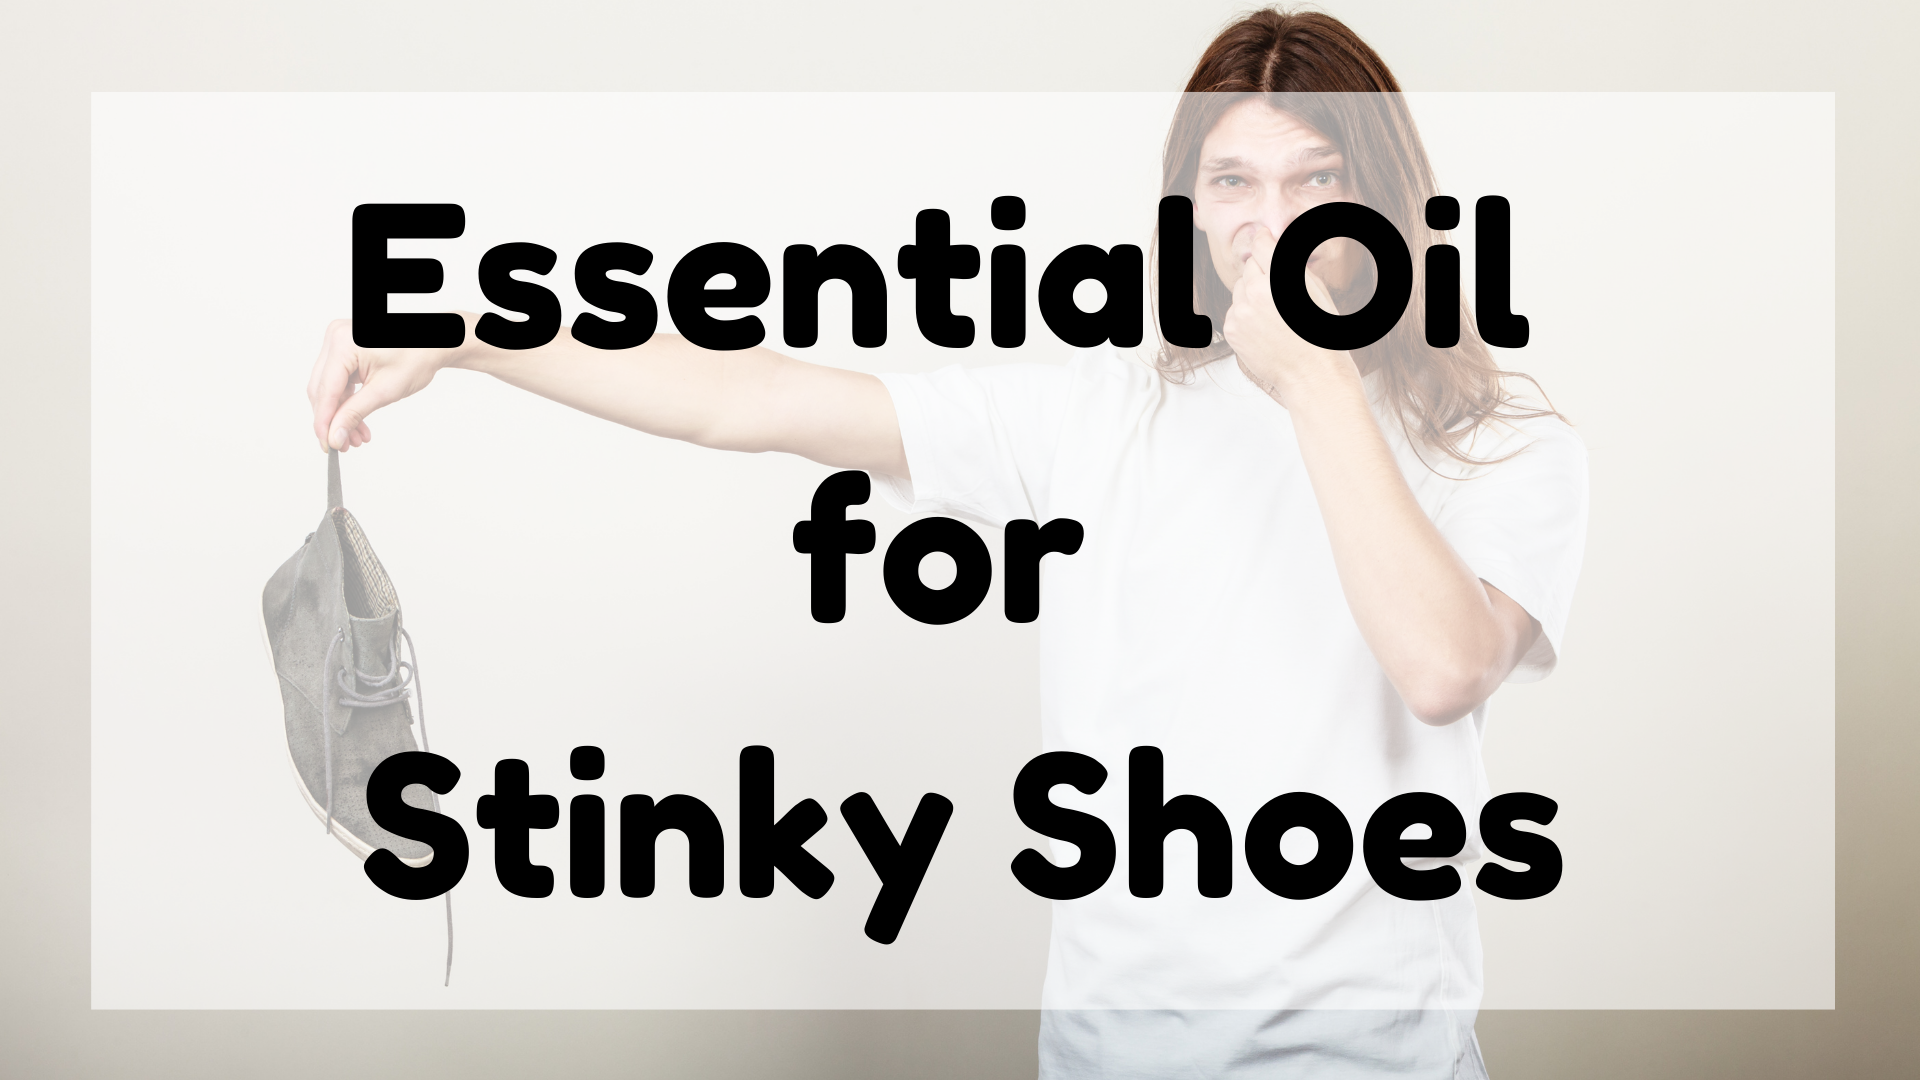 Essential Oil for Stinky Shoes featured image